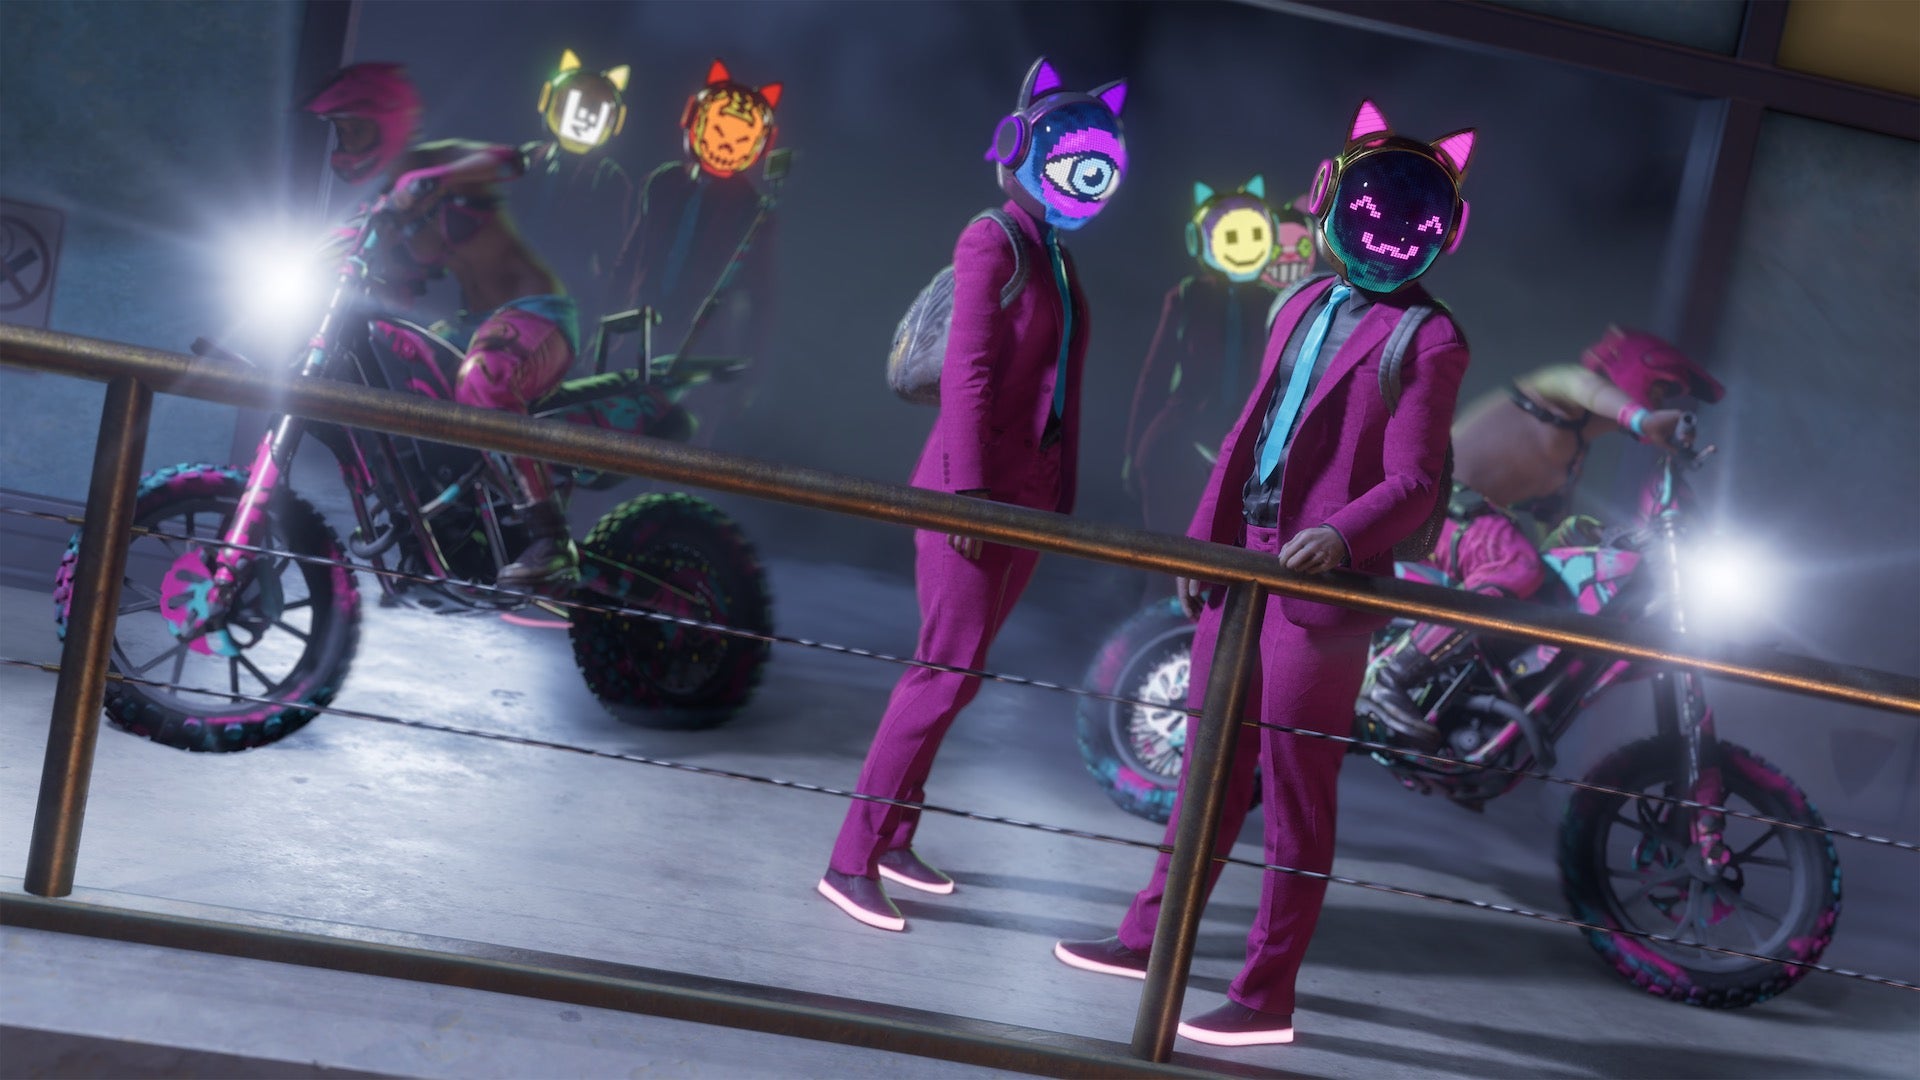 The Idols wear LED helmets and pink suits in Saints Row.